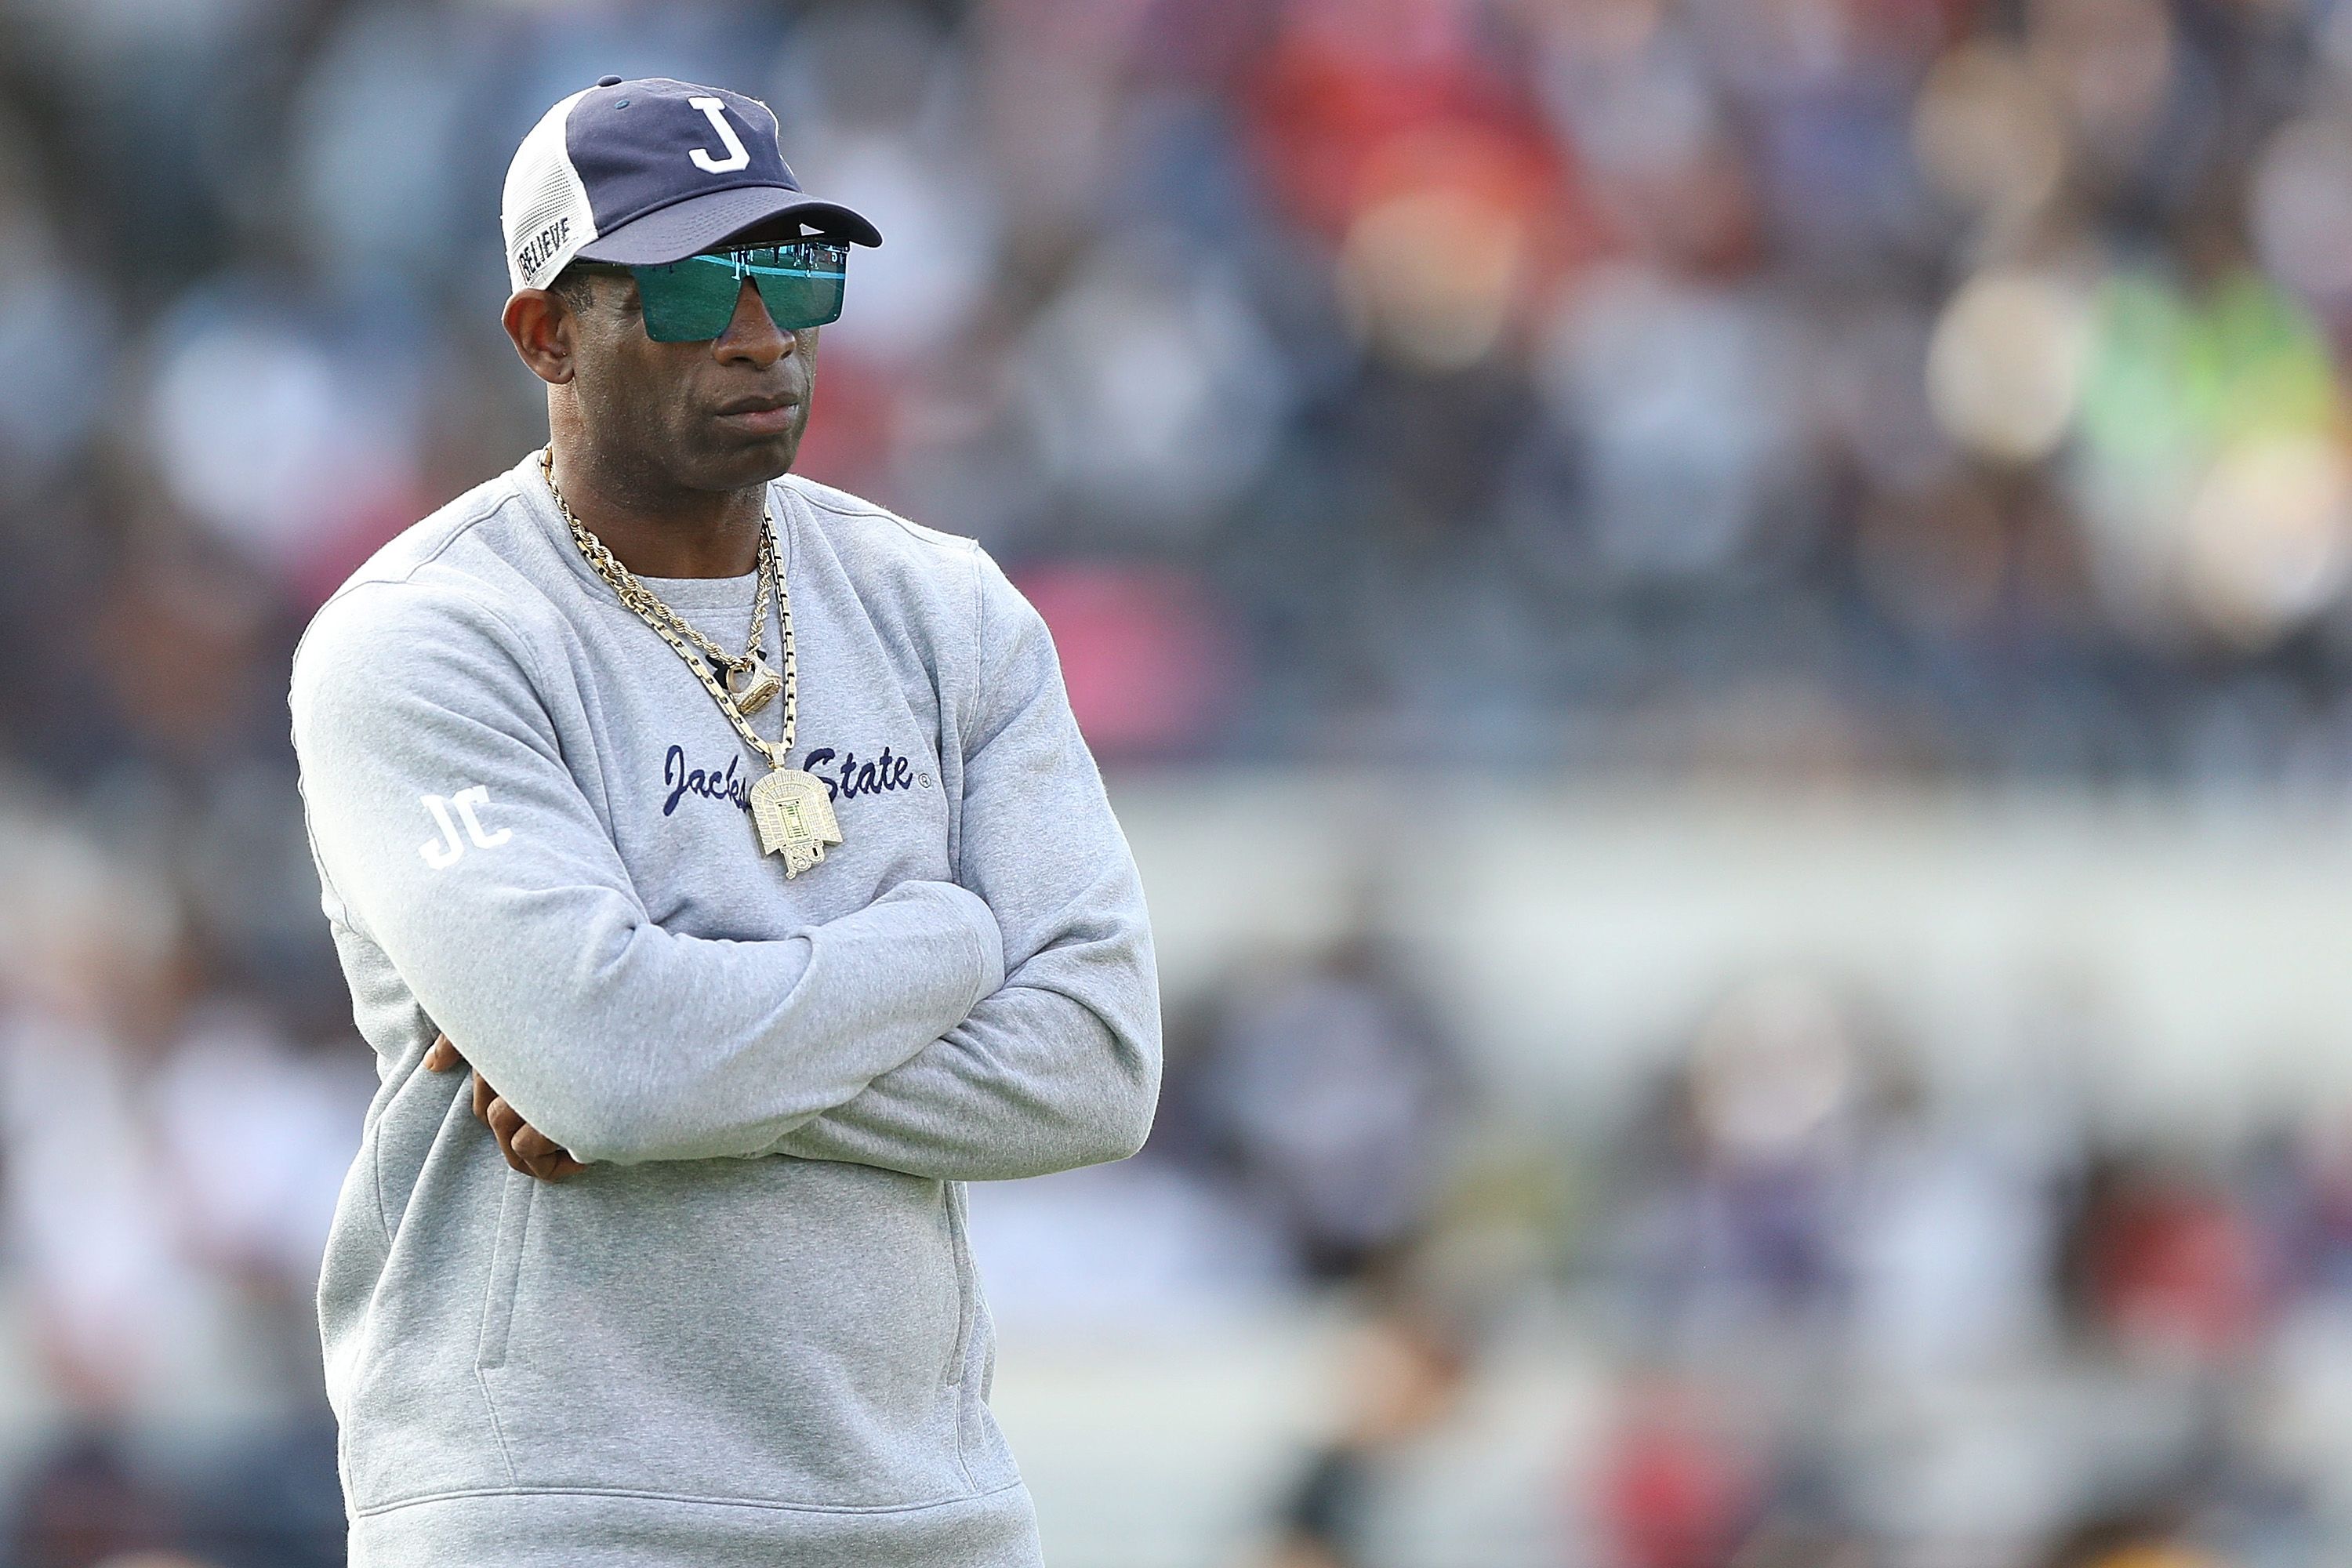 Hall of Famer Deion Sanders leaves Jackson State to take charge of